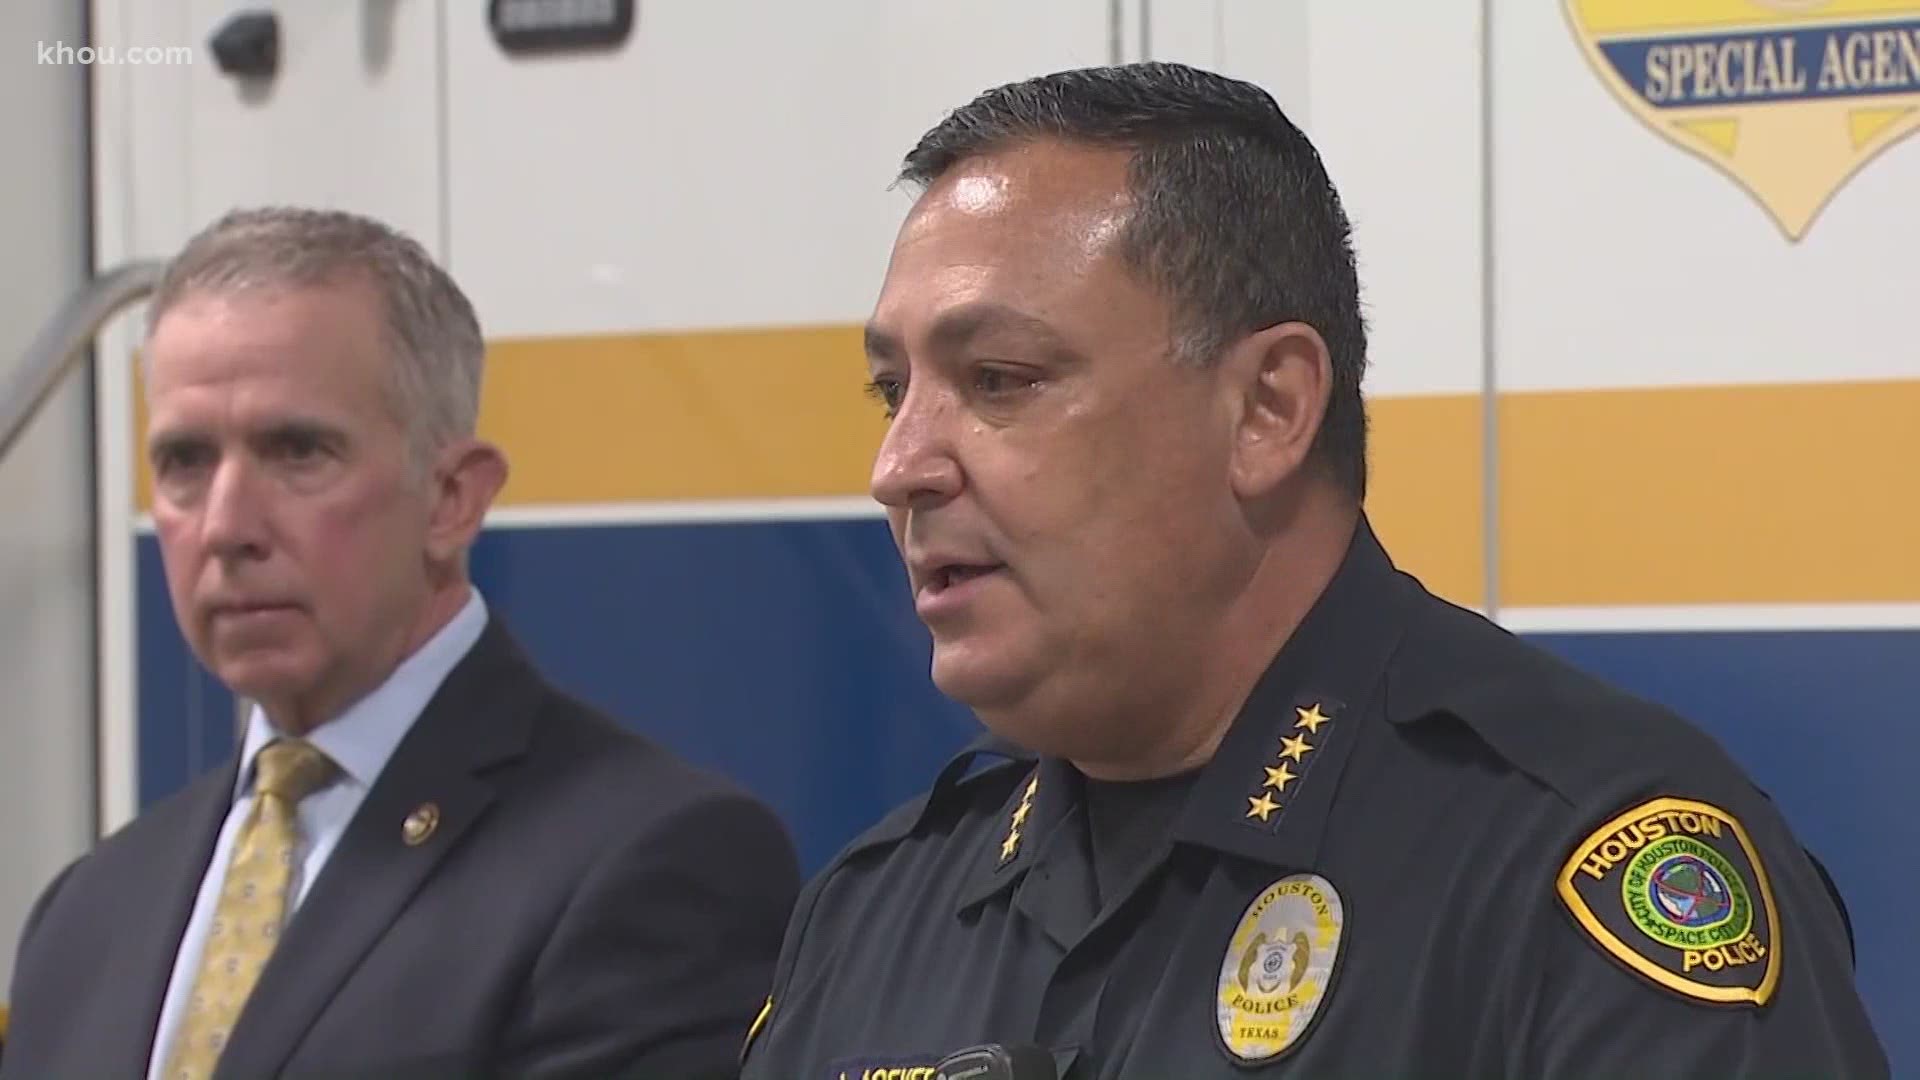 ATF and HPD formed a task force 2 years ago to catch violent criminals. That task force unveiled a new tool they say is going to help with that effort.